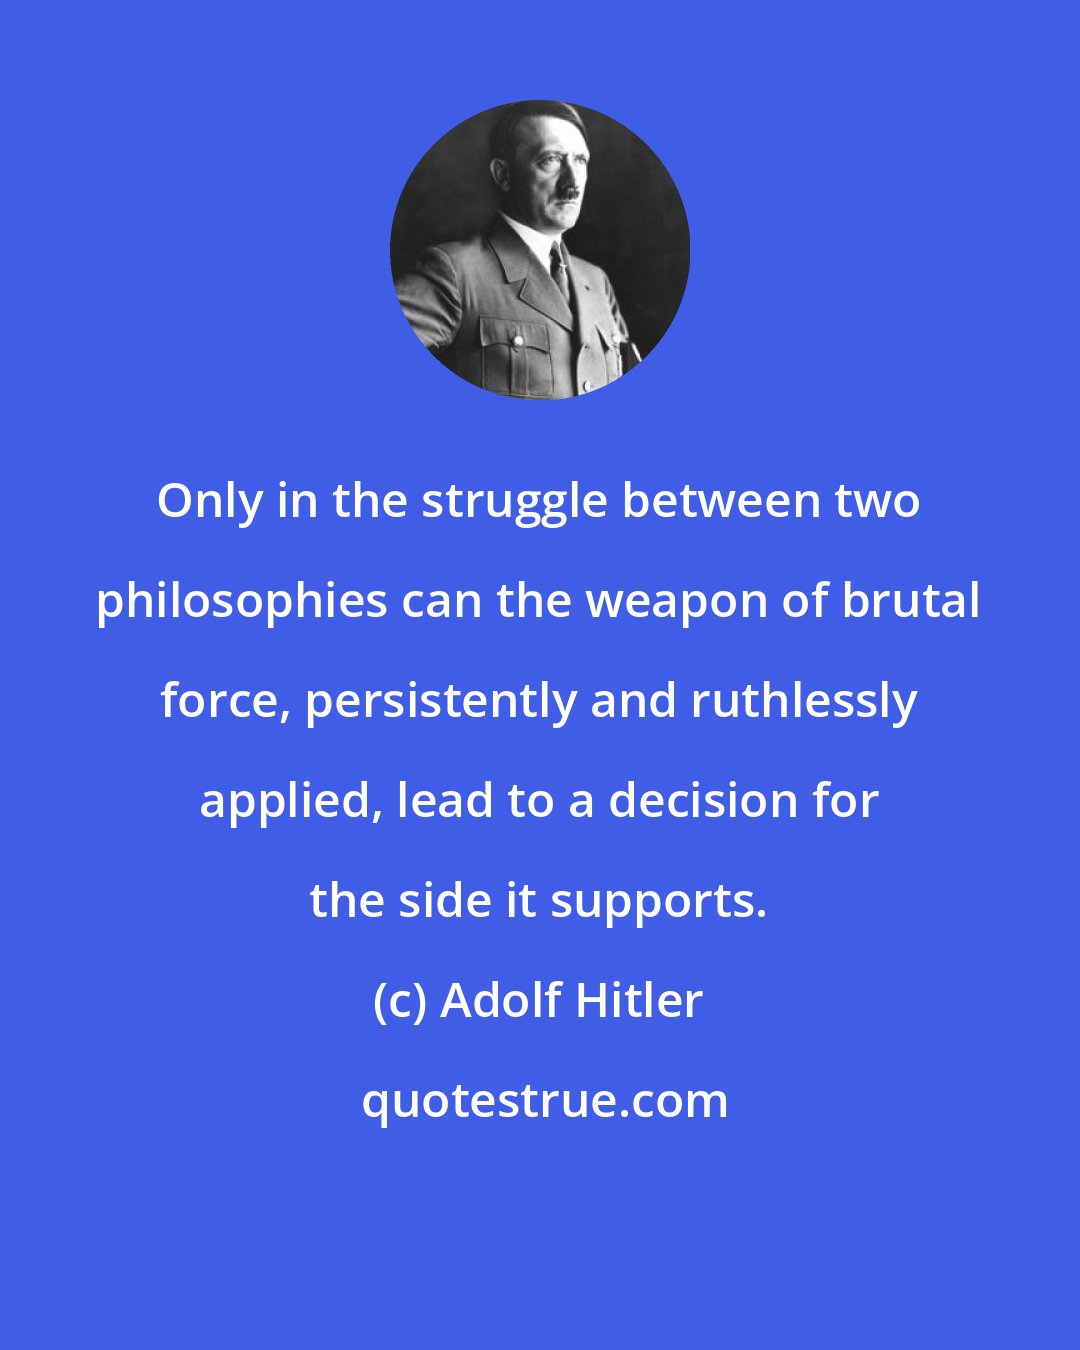 Adolf Hitler: Only in the struggle between two philosophies can the weapon of brutal force, persistently and ruthlessly applied, lead to a decision for the side it supports.